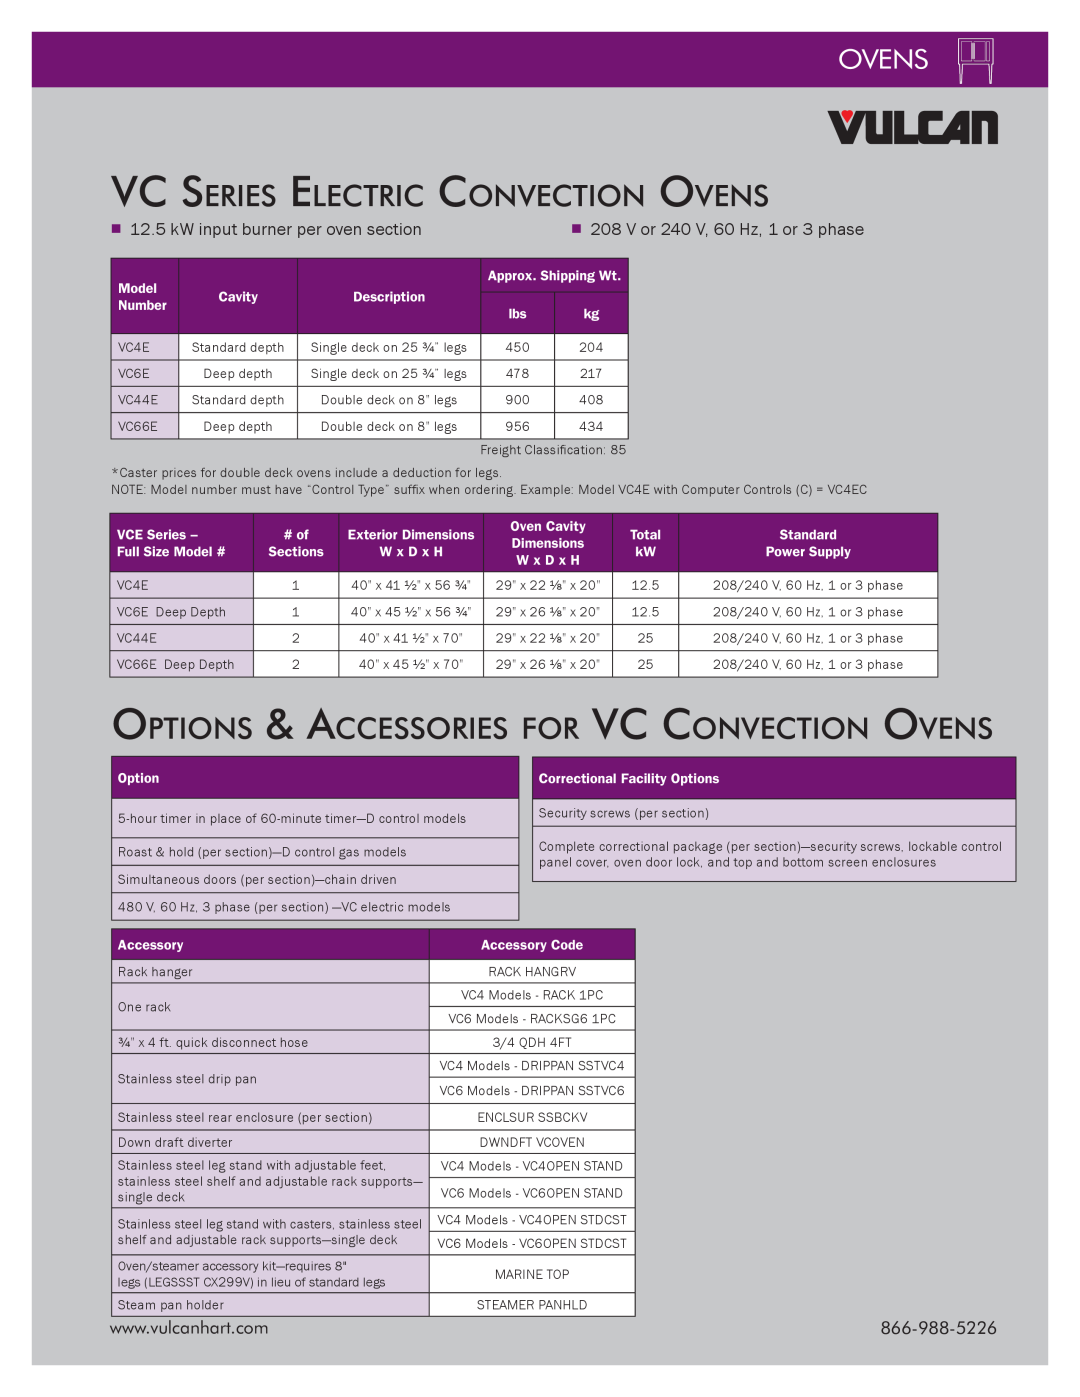 Vulcan-Hart VC44GD manual VC Series Electric Convection Ovens, Options & Accessories for VC Convection Ovens 